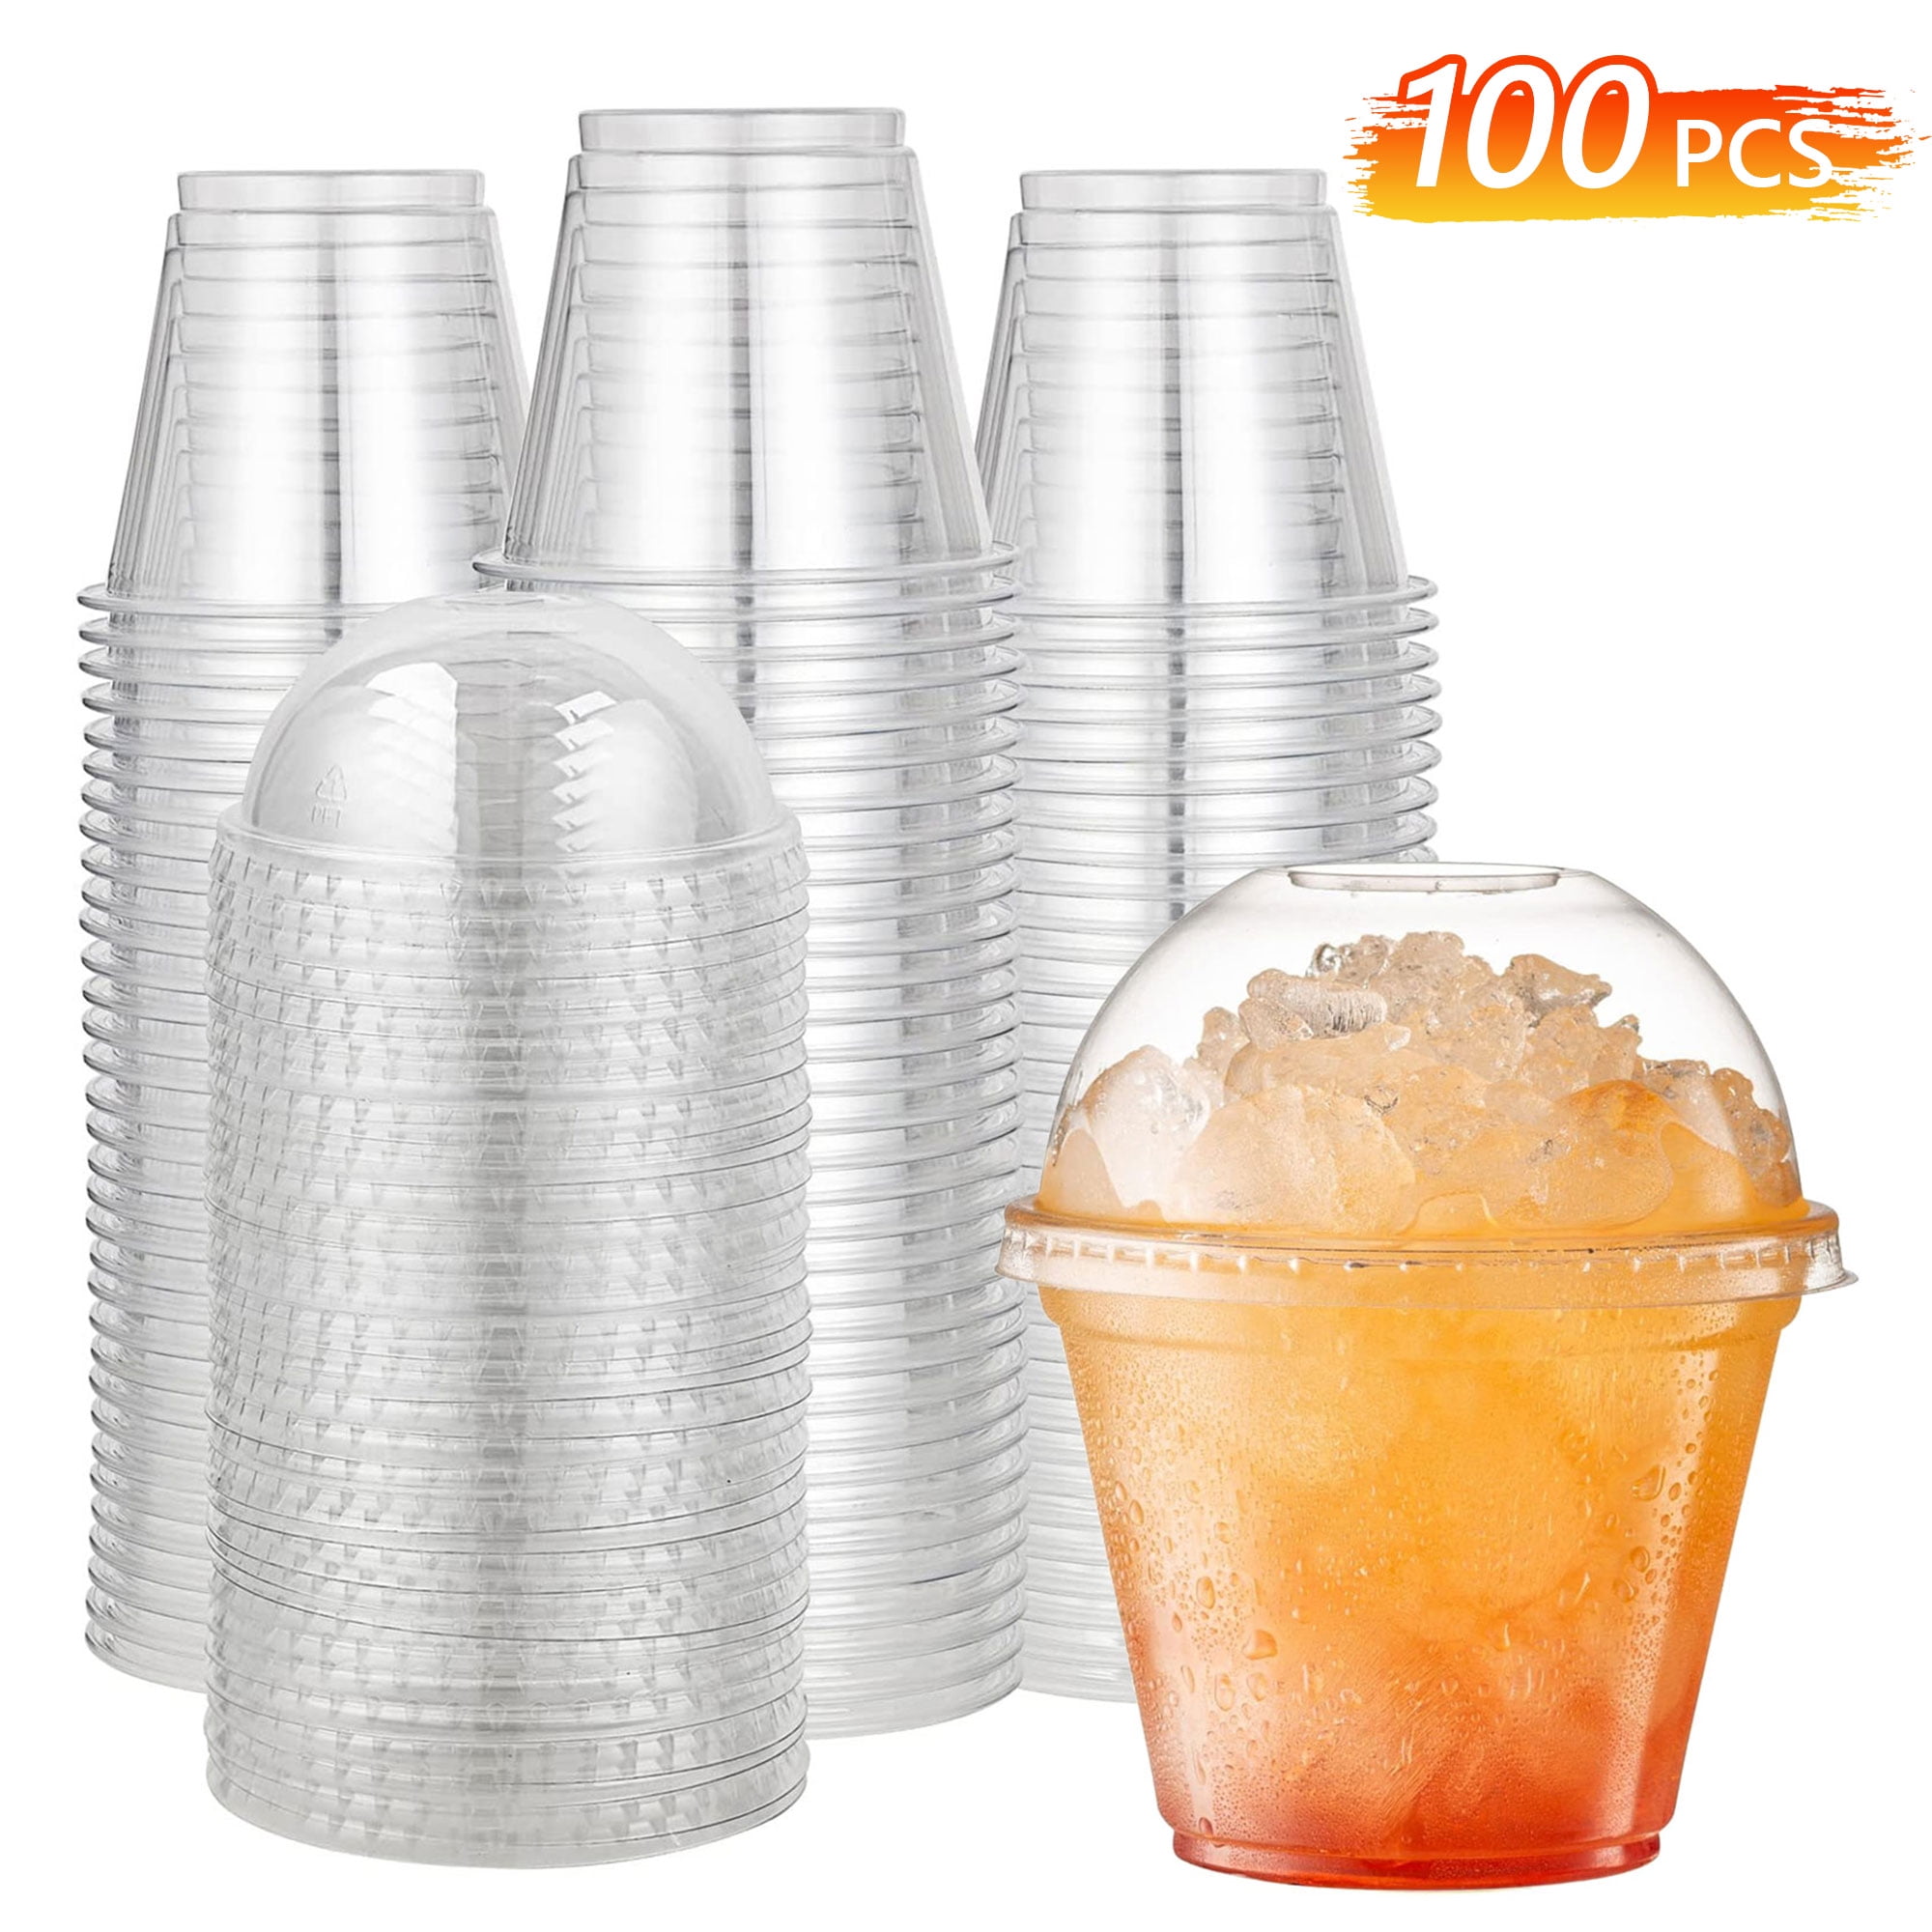 15pcs Colorful Plastic Cups Home Beverage Drinking Cup Reusable